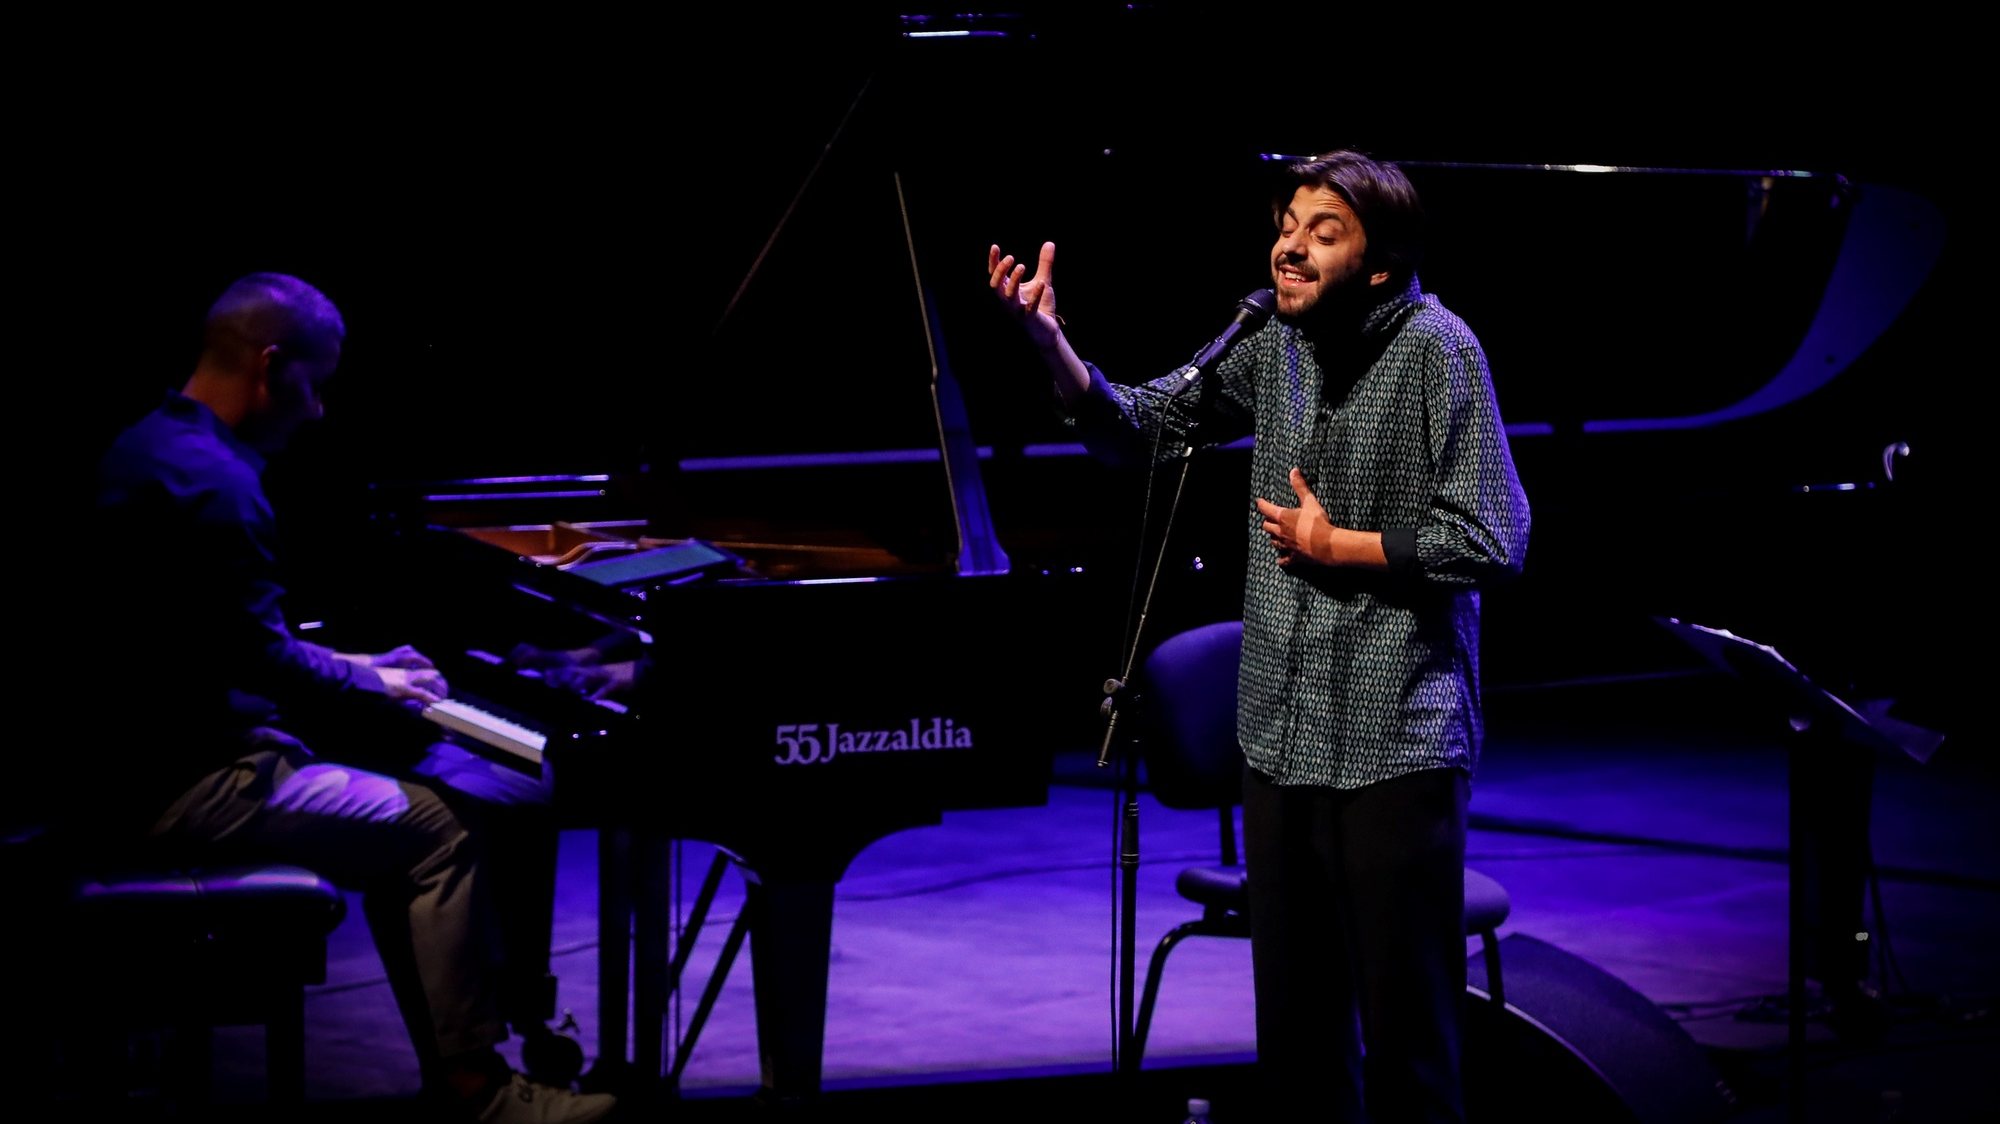 epa08563951 Portuguese singer Salvador Sobral (R), the winner of the 2017 Eurovision Song Contest,  performs at the Kursaal Congress Center and Auditorium in San Sebastian, northern Spain, 24 July 2020. The performance was part of the 55th edition of the San Sebastian Jazz Festival (officially titled &#039;Heineken Jazzaldia&#039;), which runs from 22-26 July.  EPA/JAVIER ETXEZARRETA